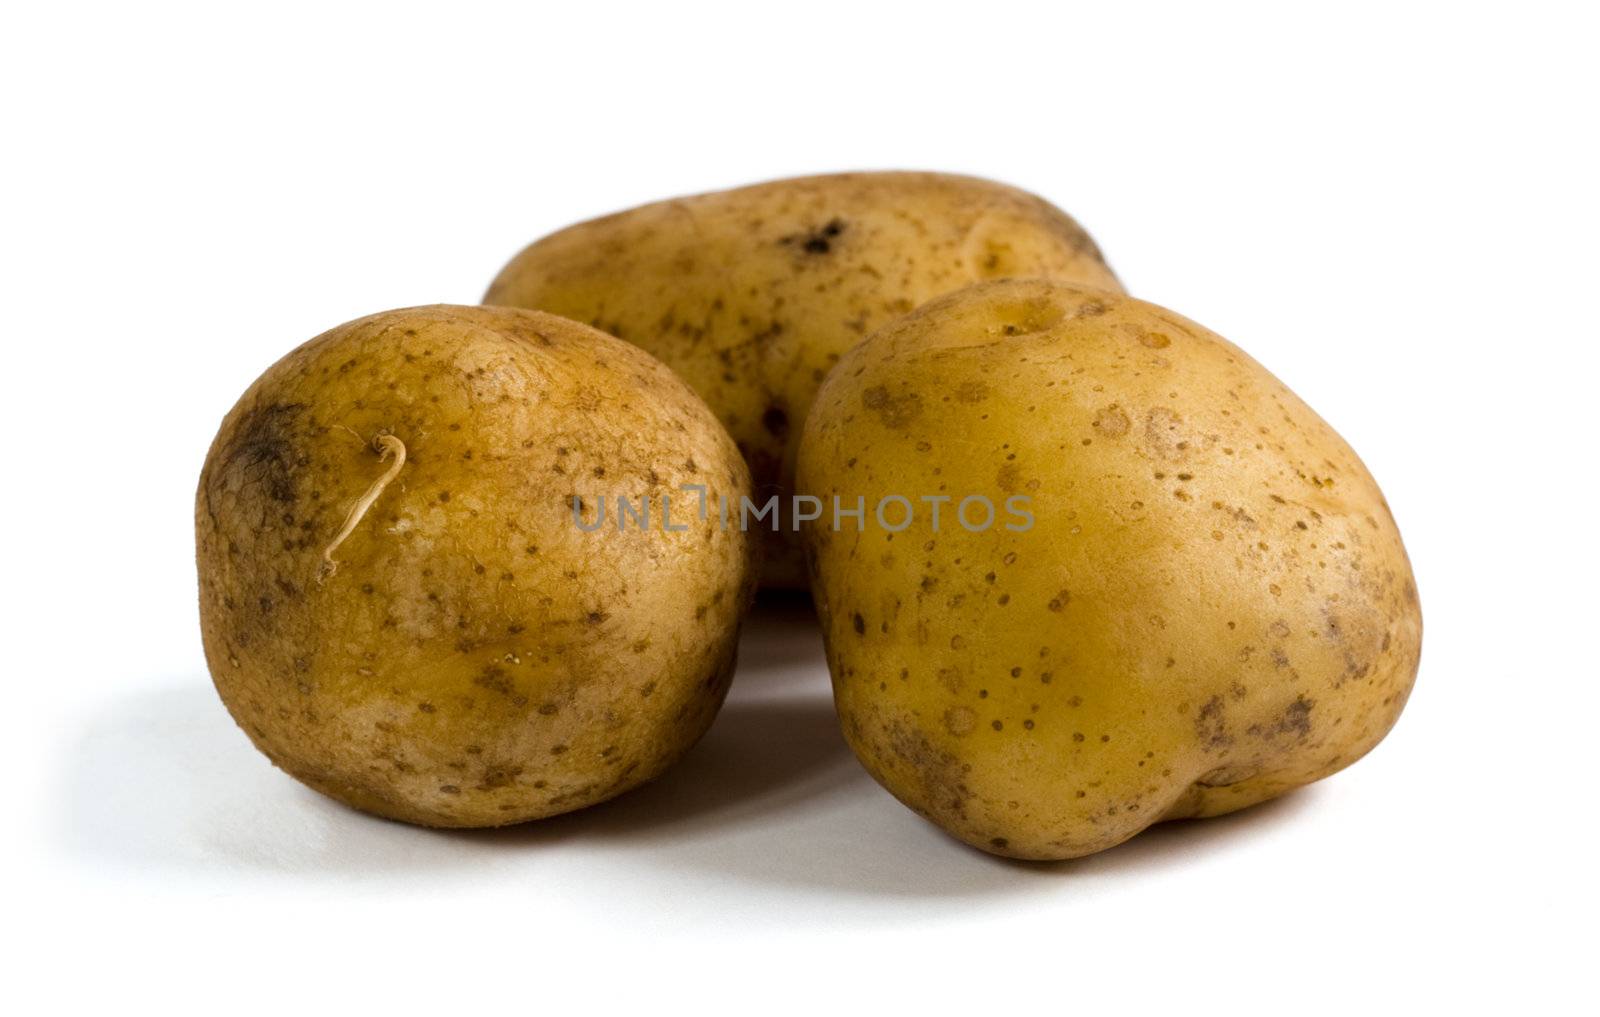 Three raw potatoes on white background with shadows. Clipping path included